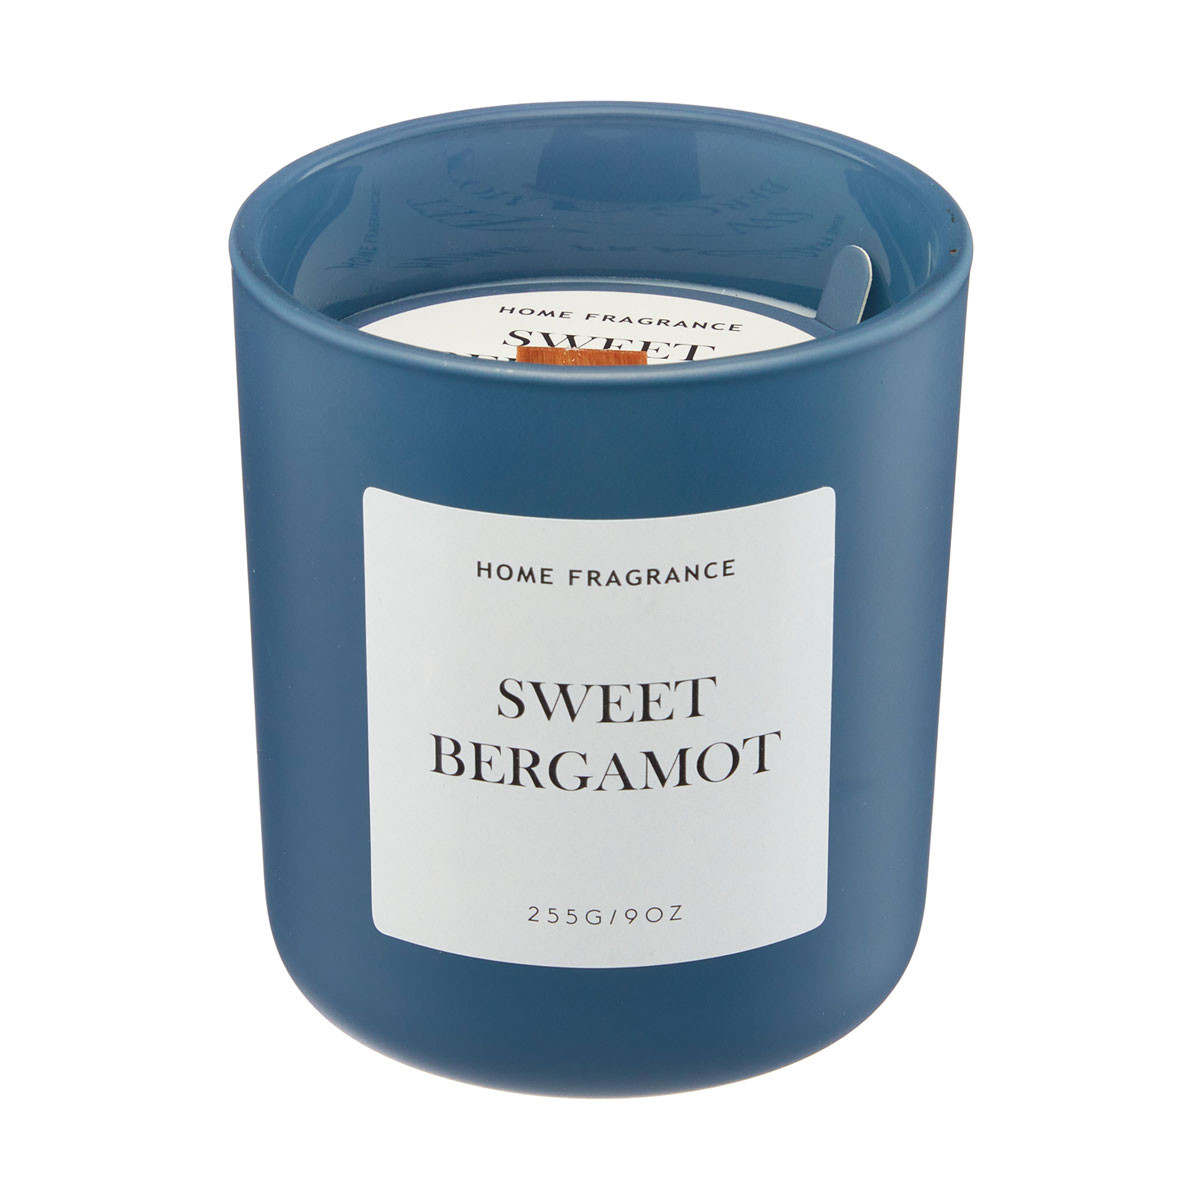 Home Fragrance Sweet Bergamot Scented Candle